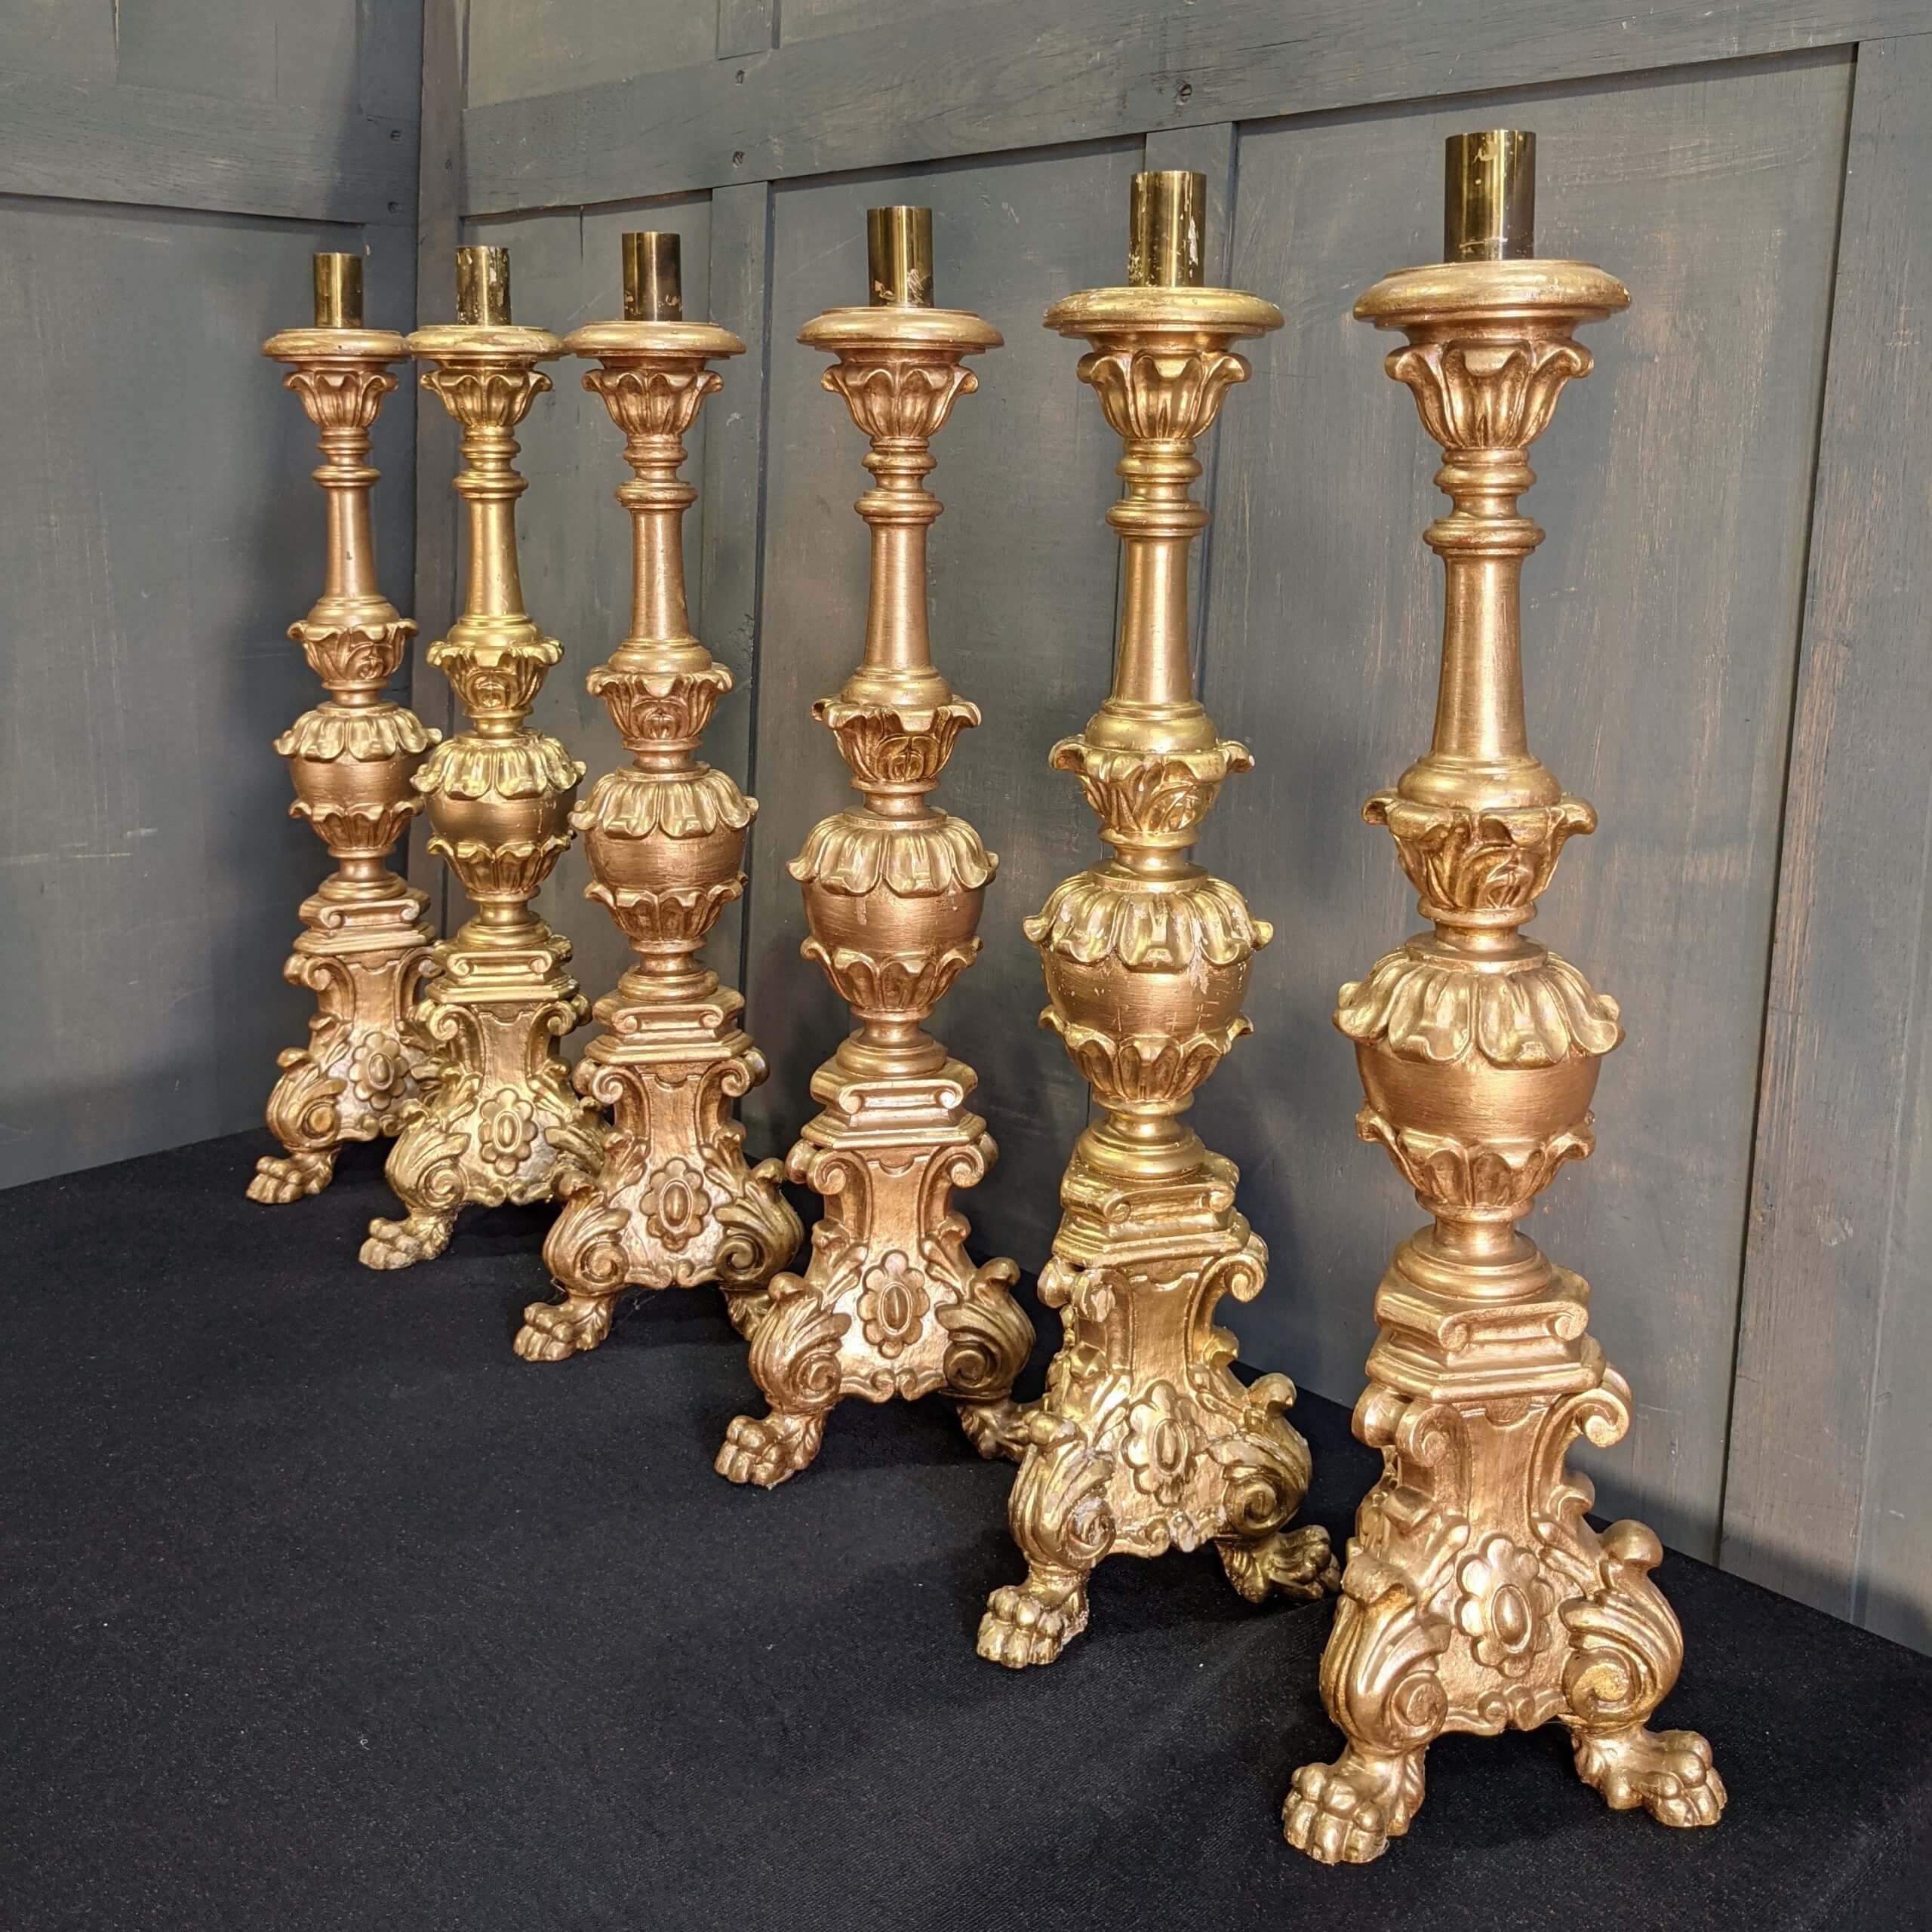 HUGE Antique Candlesticks Large French Alter Baroque Church Candle